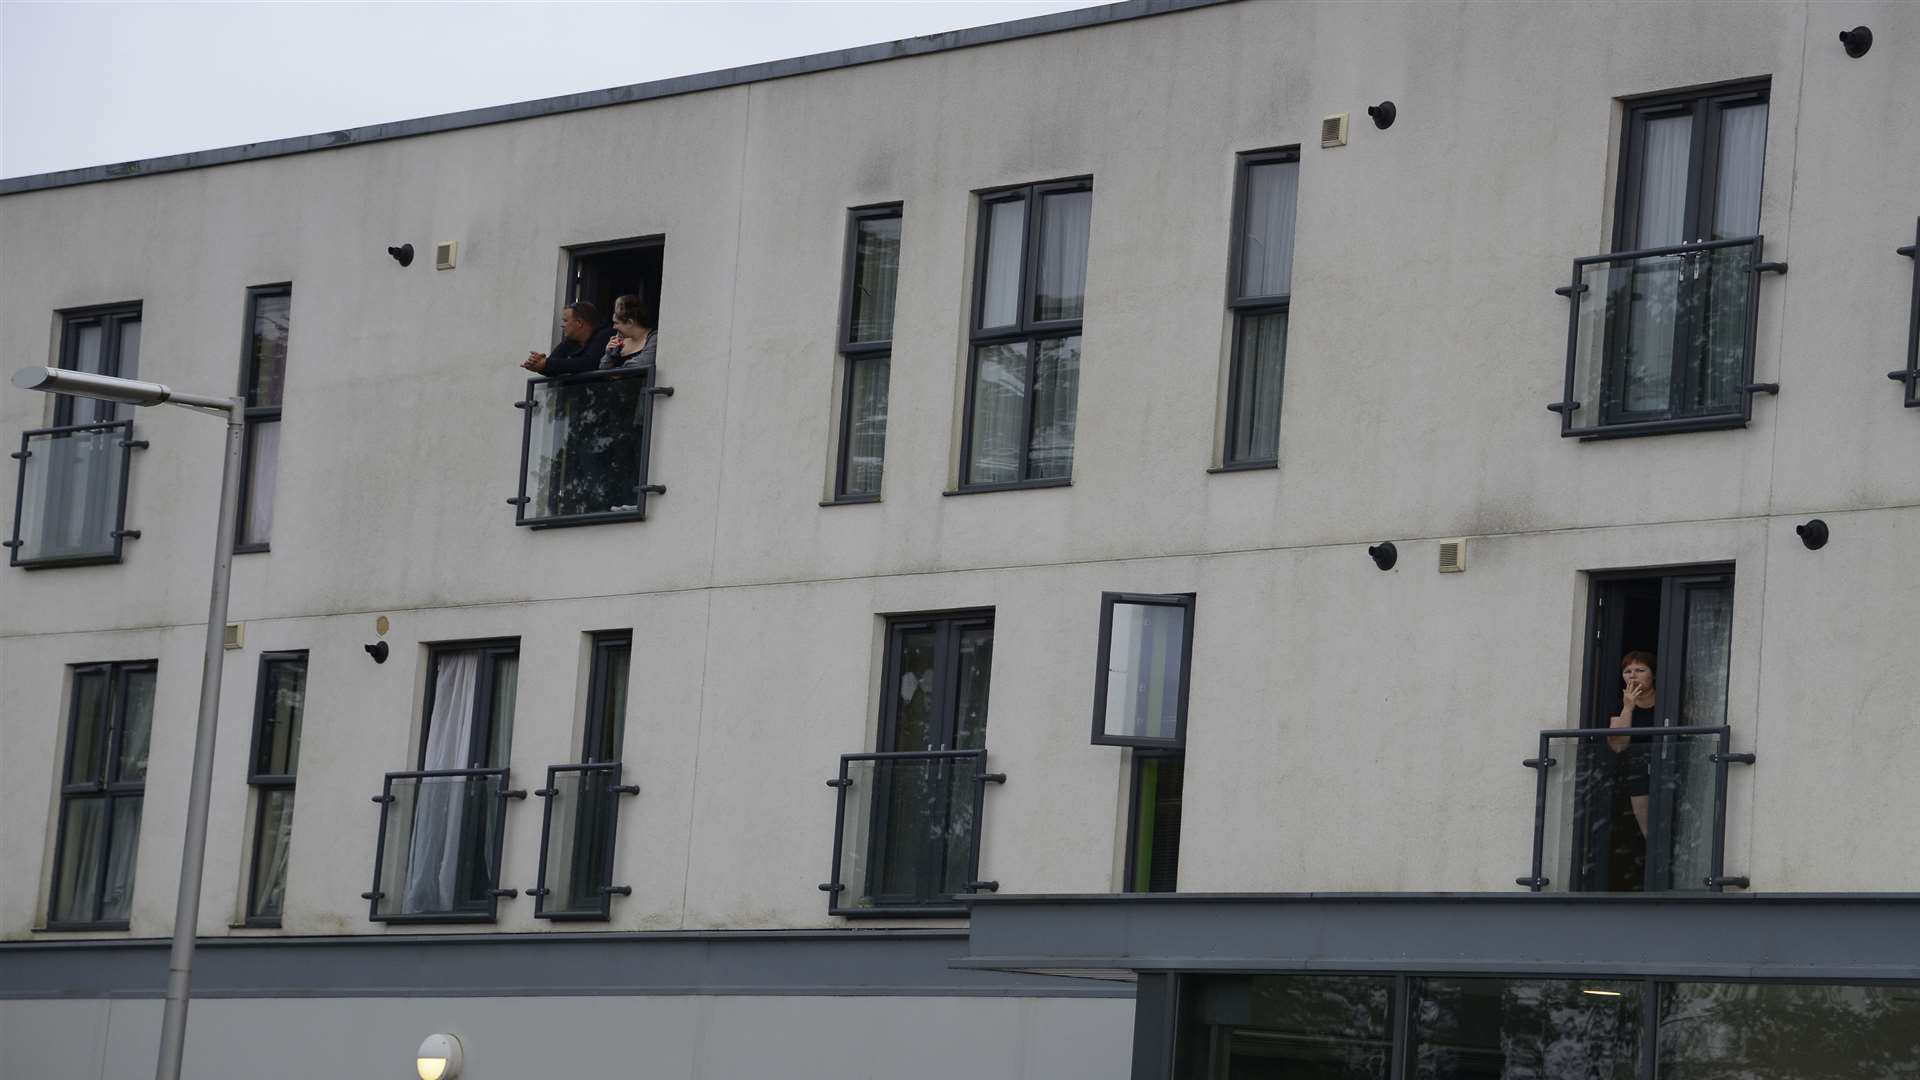 The woman plunged about 30ft from the building. Picture: Paul Amos.